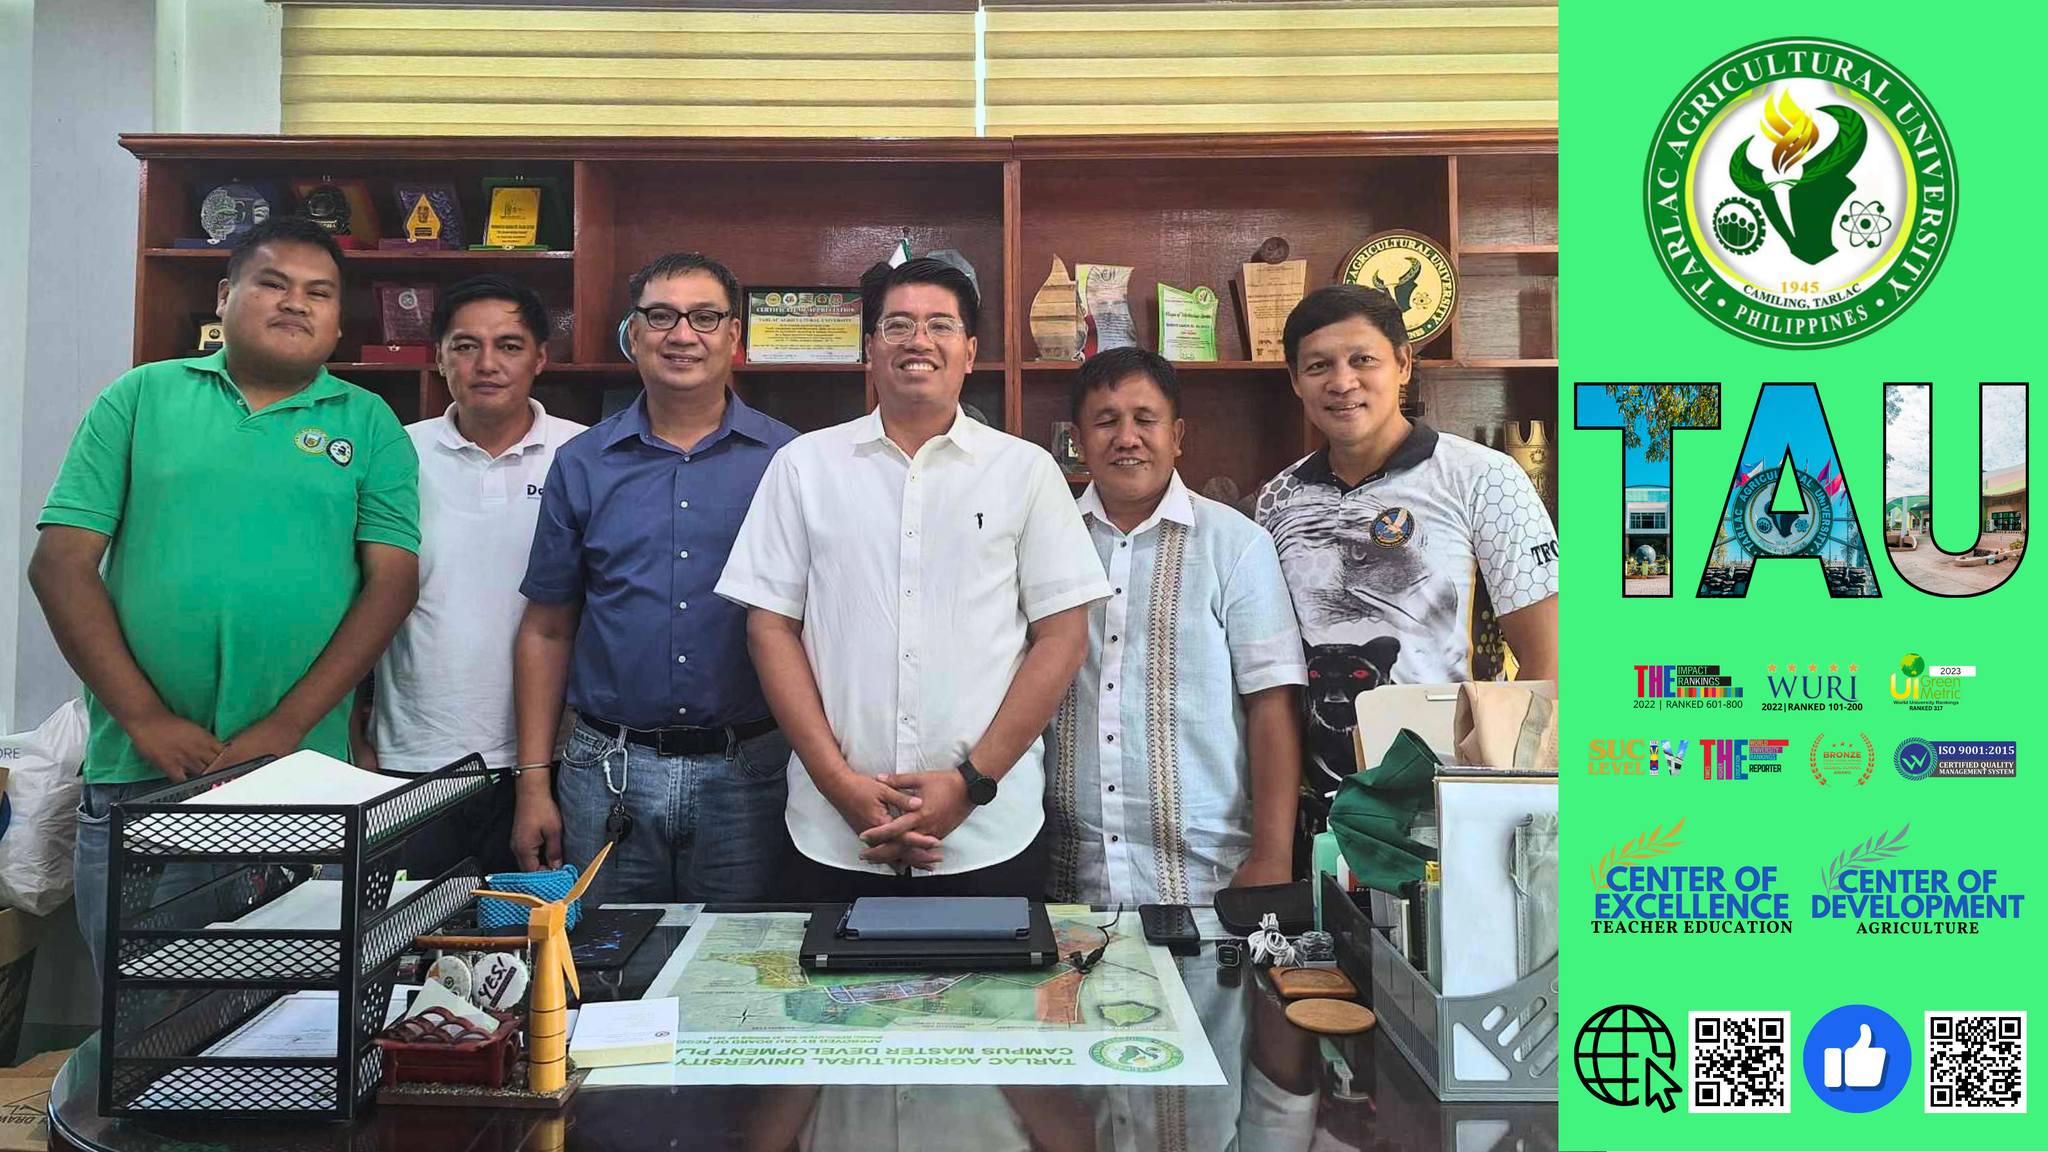 𝐂𝐀𝐏𝐓𝐔𝐑𝐄𝐃 𝐈𝐍 𝐋𝐄𝐍𝐒 | Signifying their full support to the new administration of their Alma Mater, several officials of Tarlac Agricultural University’s (TAU) Federated Alumni Association Inc. (FAAI) pay a courtesy visit to Dr. Silverio Ramon DC. Salunson, 13 June.